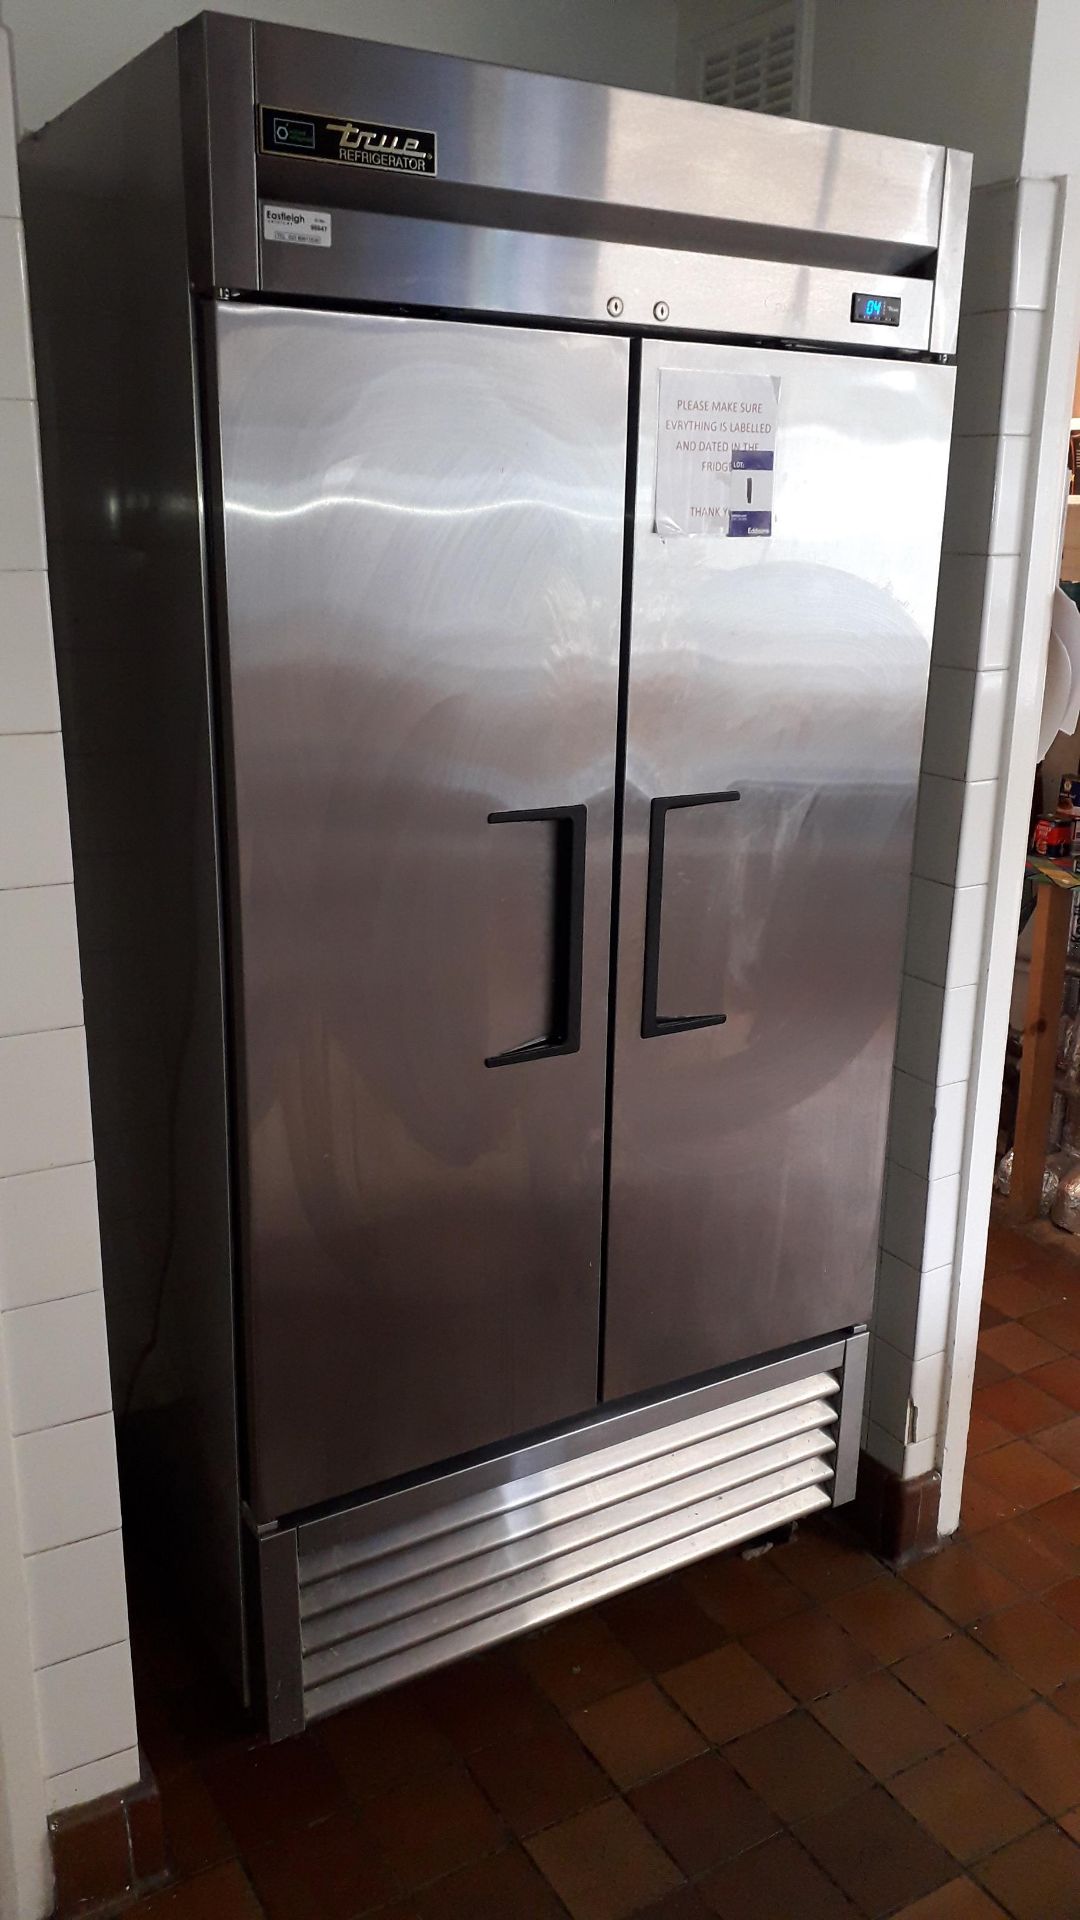 True T-35-HC-LD Stainless Steel Twin Door Upright Refrigerator. Serial Number: 8544902 - Image 2 of 4